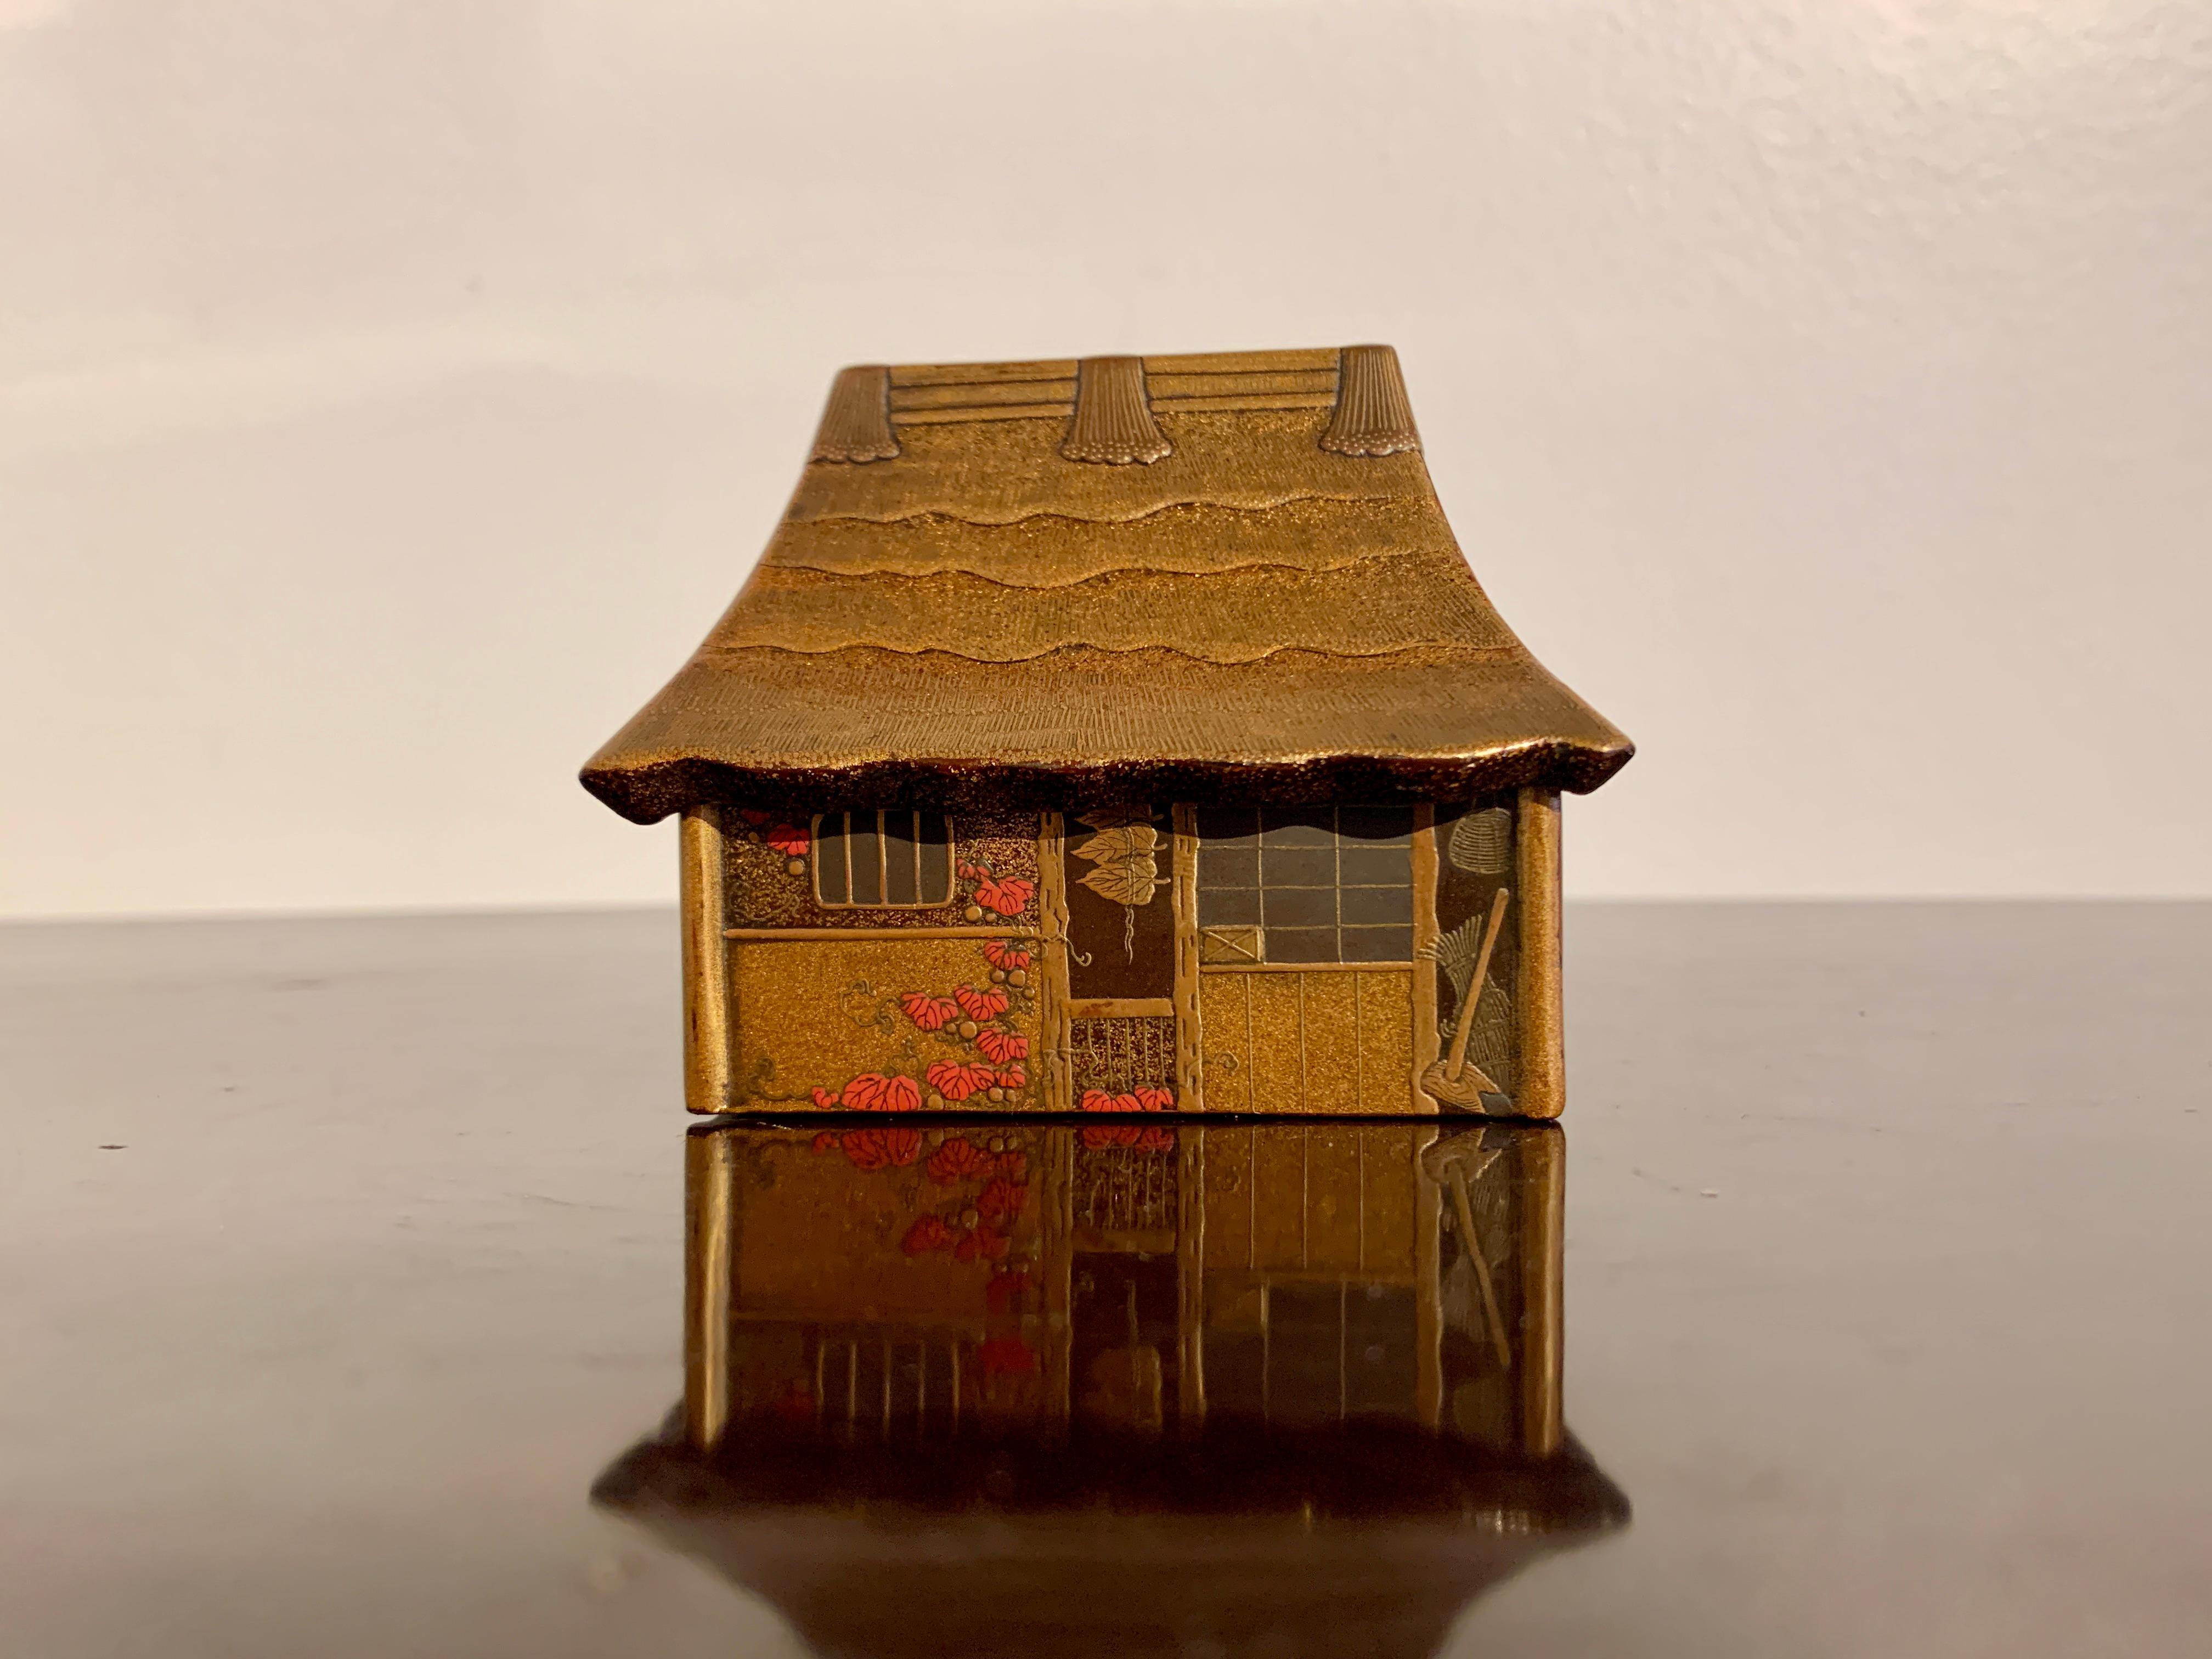 A delightful and intricately decorated lacquer box for storing incense, kogo, in the form of a traditional farm house, Meiji period (1864 - 1912), late 19th century, Japan.

The kogo, or small box for storing incense, takes the whimsical form of a